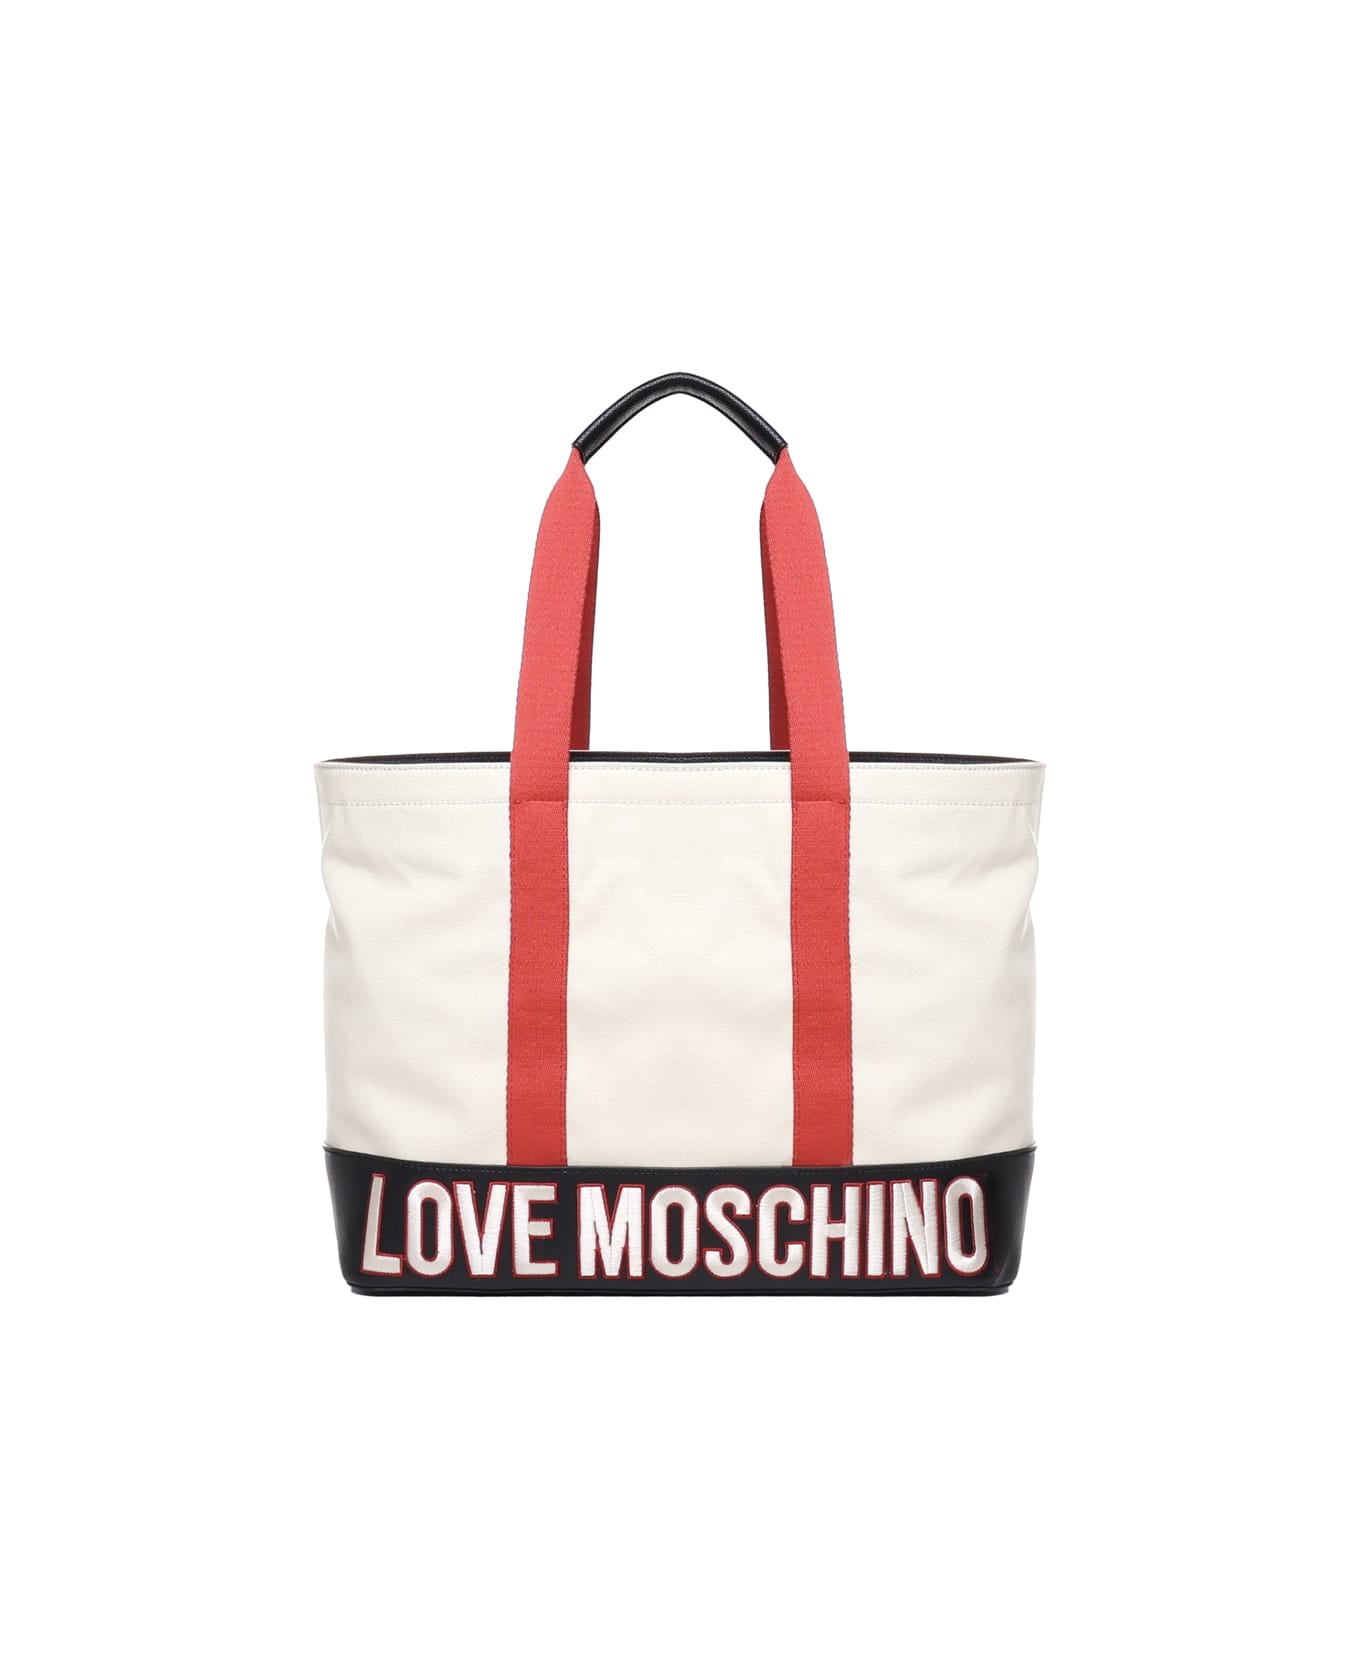 Love Moschino Cotton Free Time Shopping Bag - White, red, black トートバッグ